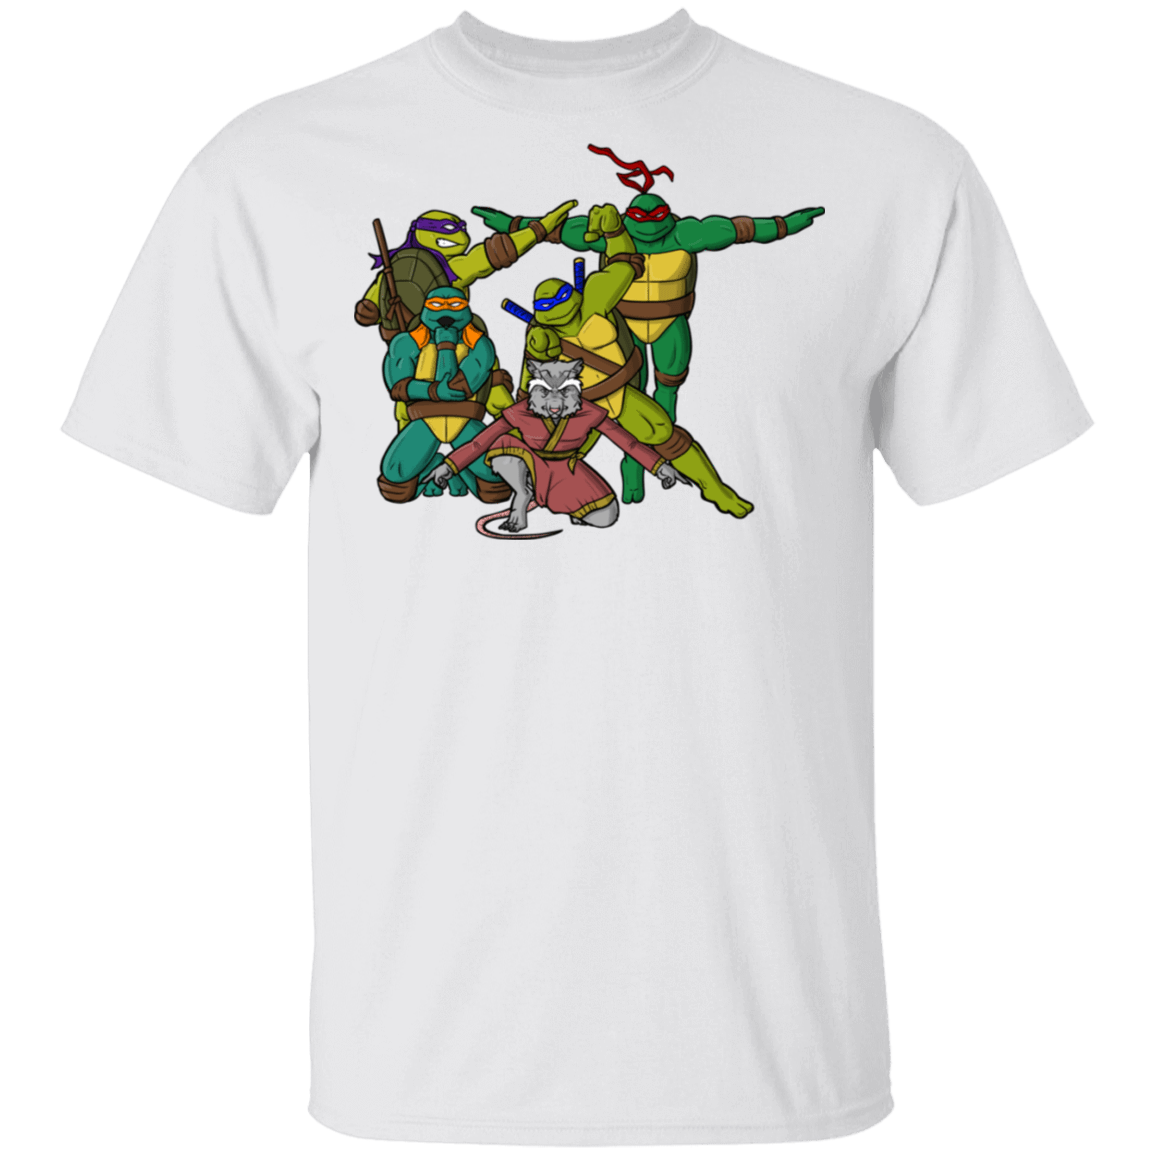 T-Shirts White / S Turtle Force T-Shirt